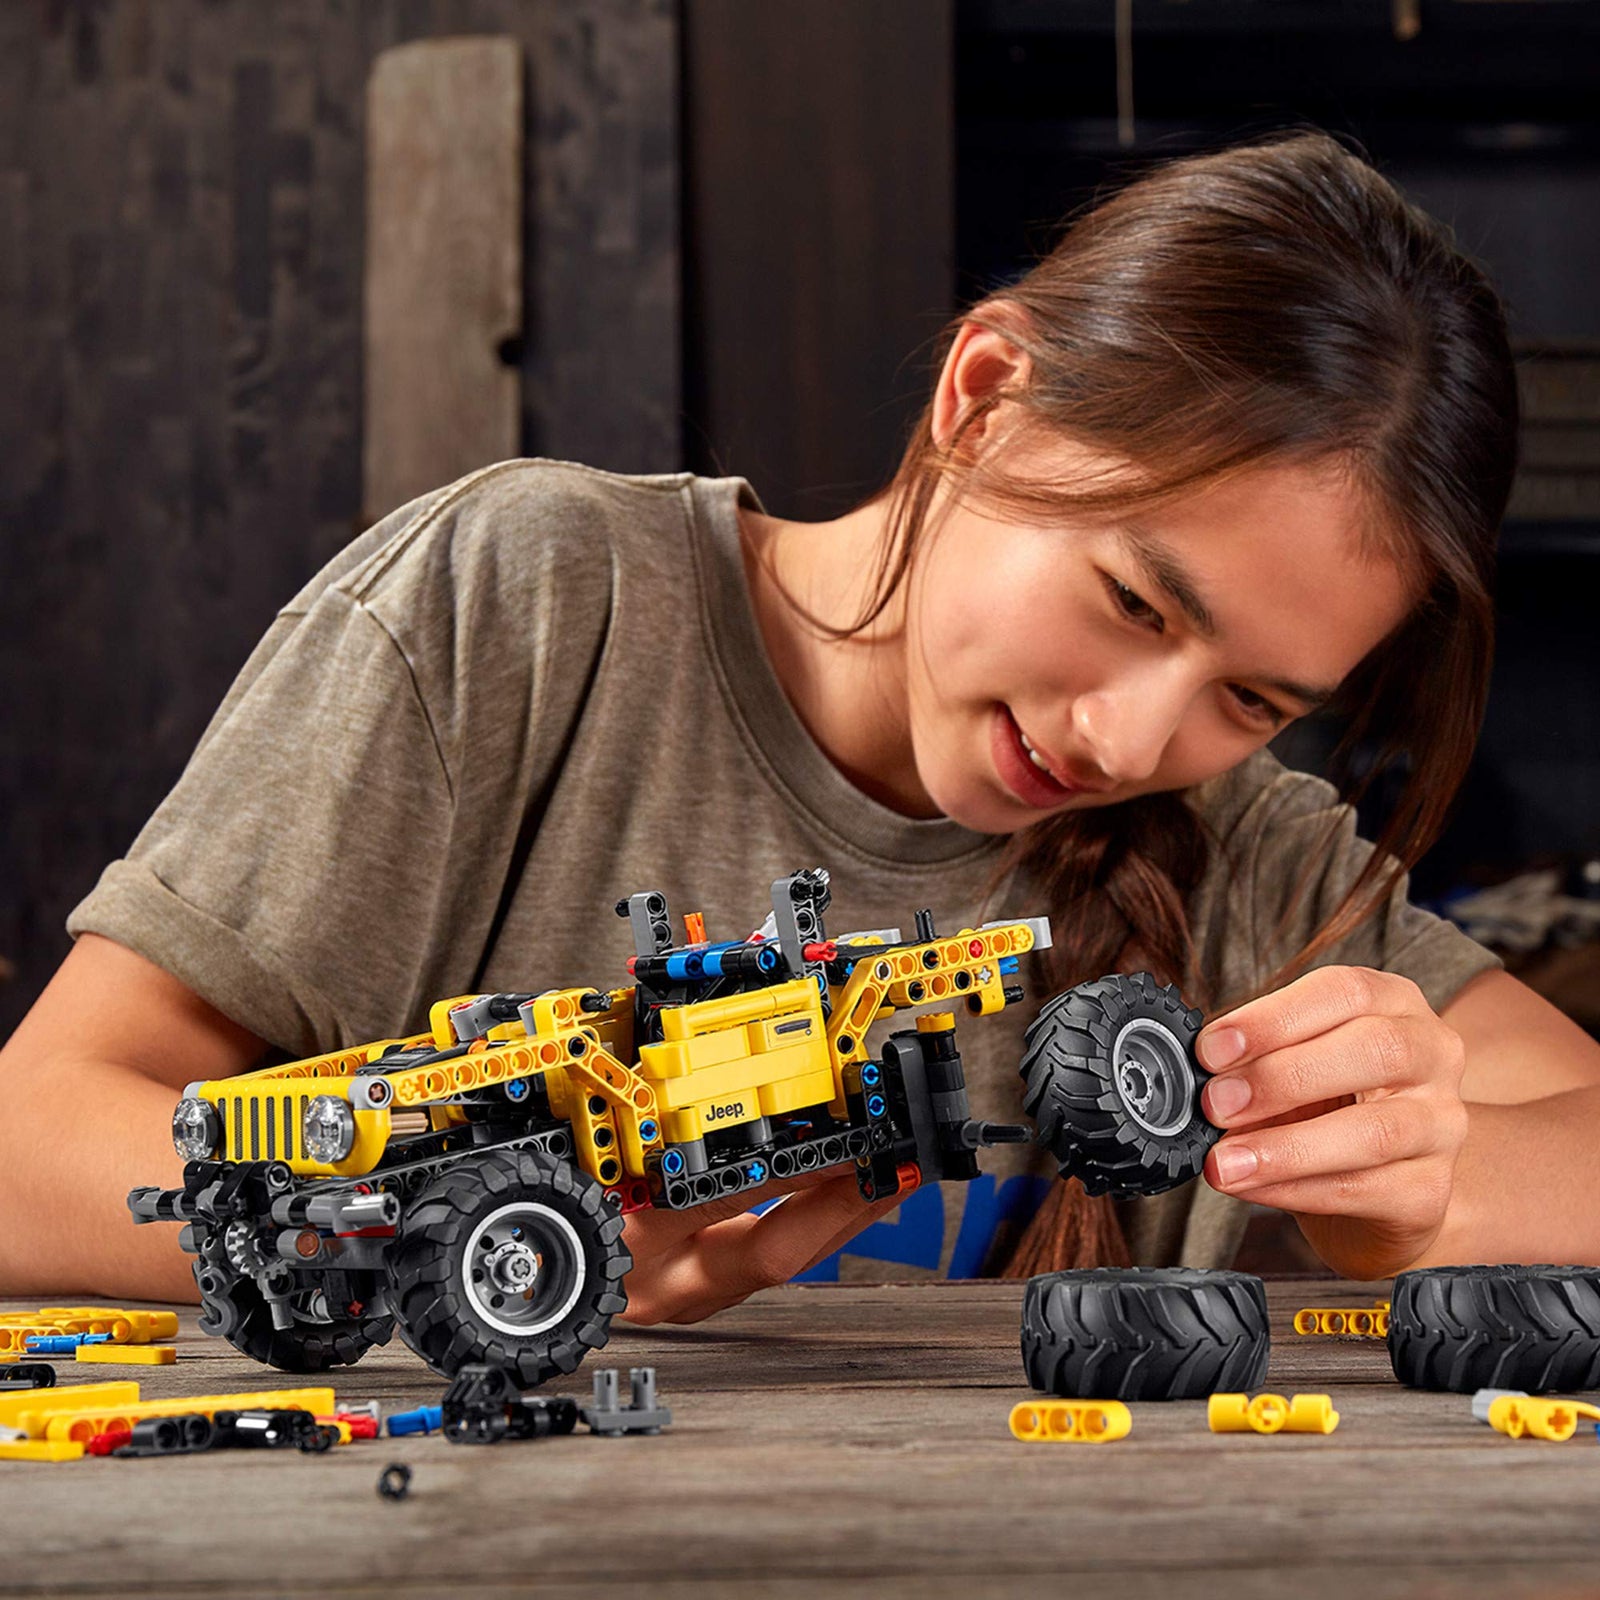 LEGO Technic Jeep Wrangler 42122; an Engaging Model Building Kit for Kids Who Love High-Performance Toy Vehicles, New 2021 (665 Pieces)